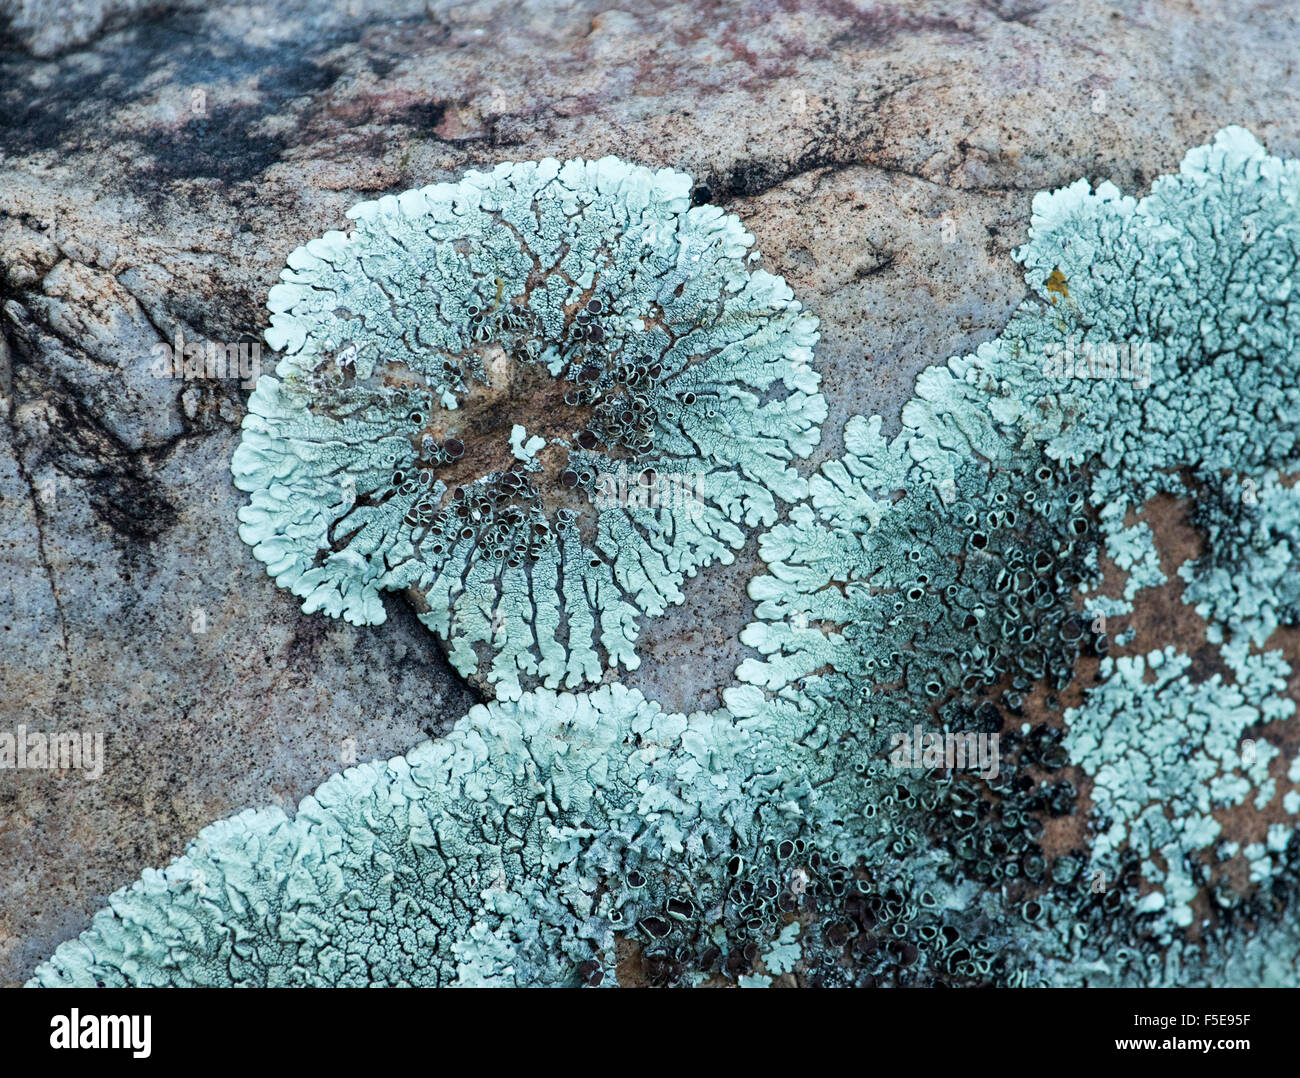 Pale blue / green lichen, Xanthoparmelia species, growing on rock in Flinders Ranges in outback South Australia Stock Photo